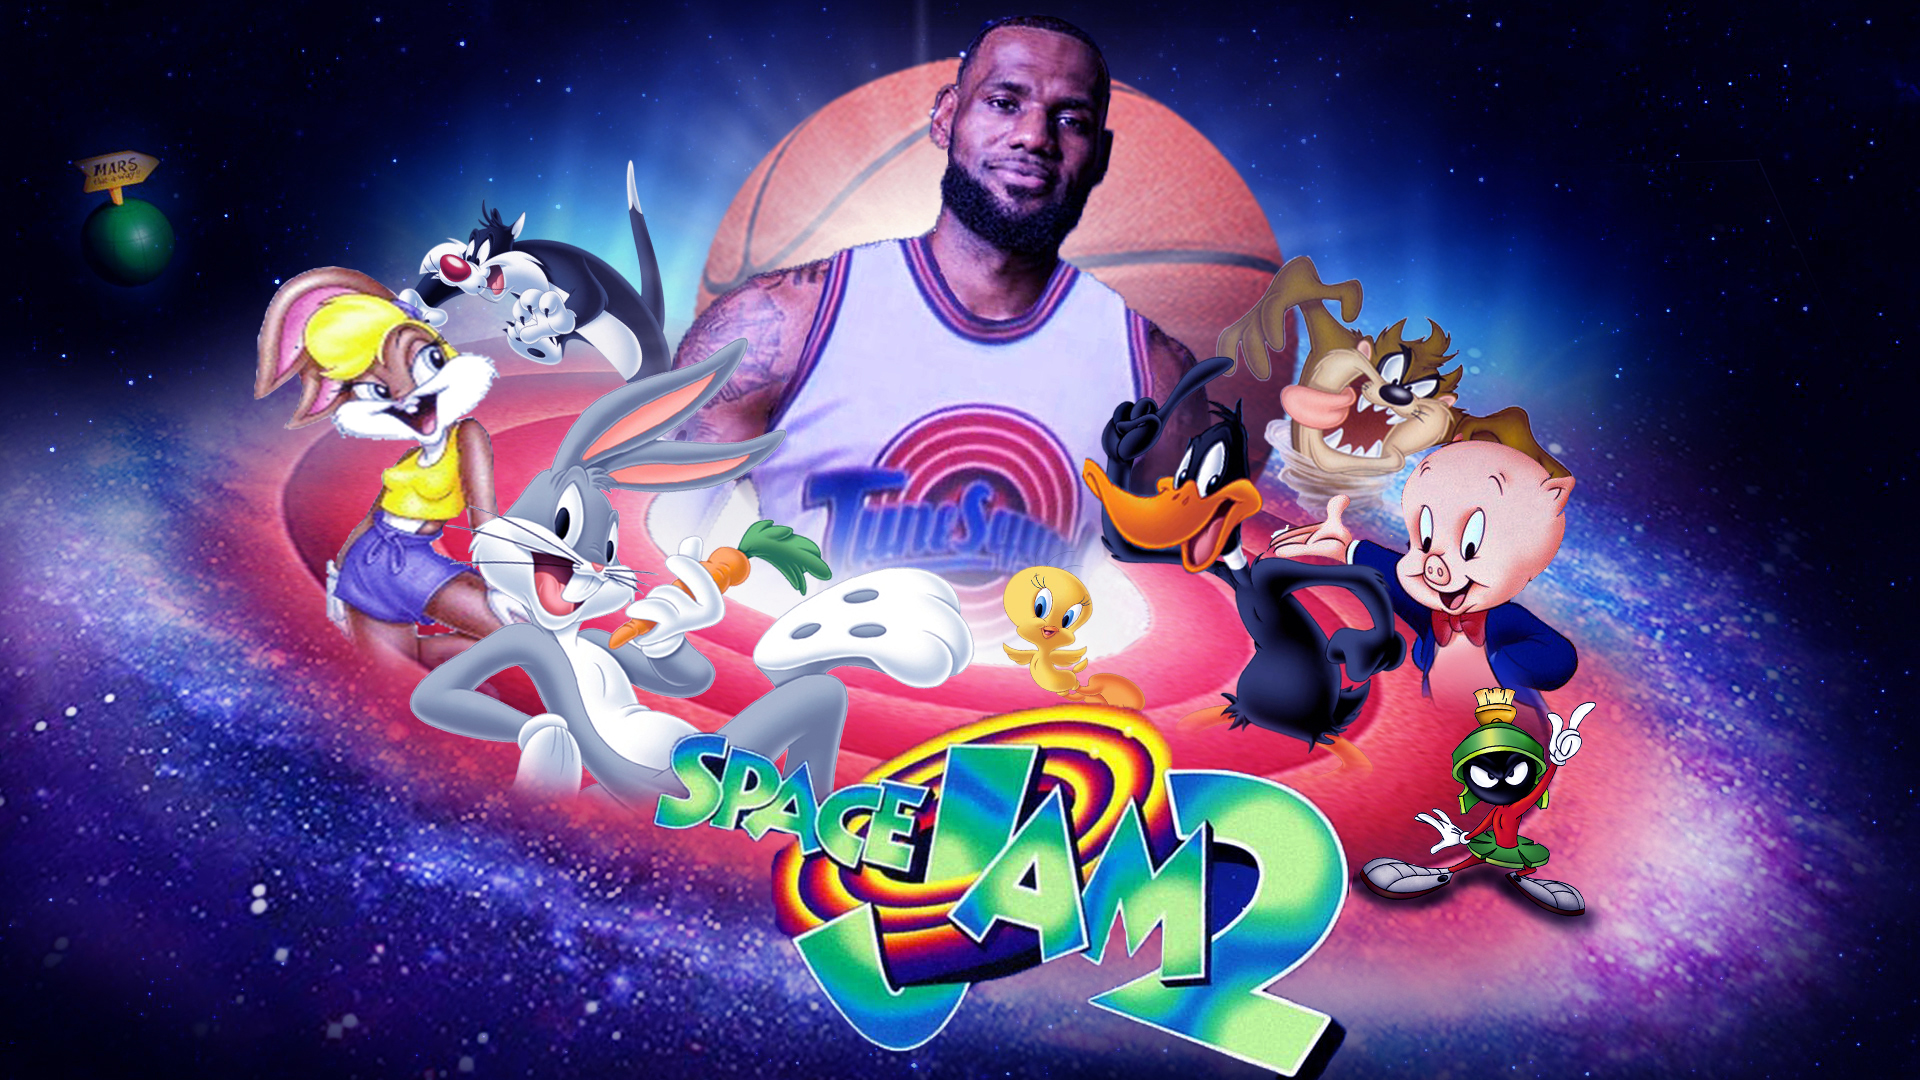 Space Jam 2 Images.